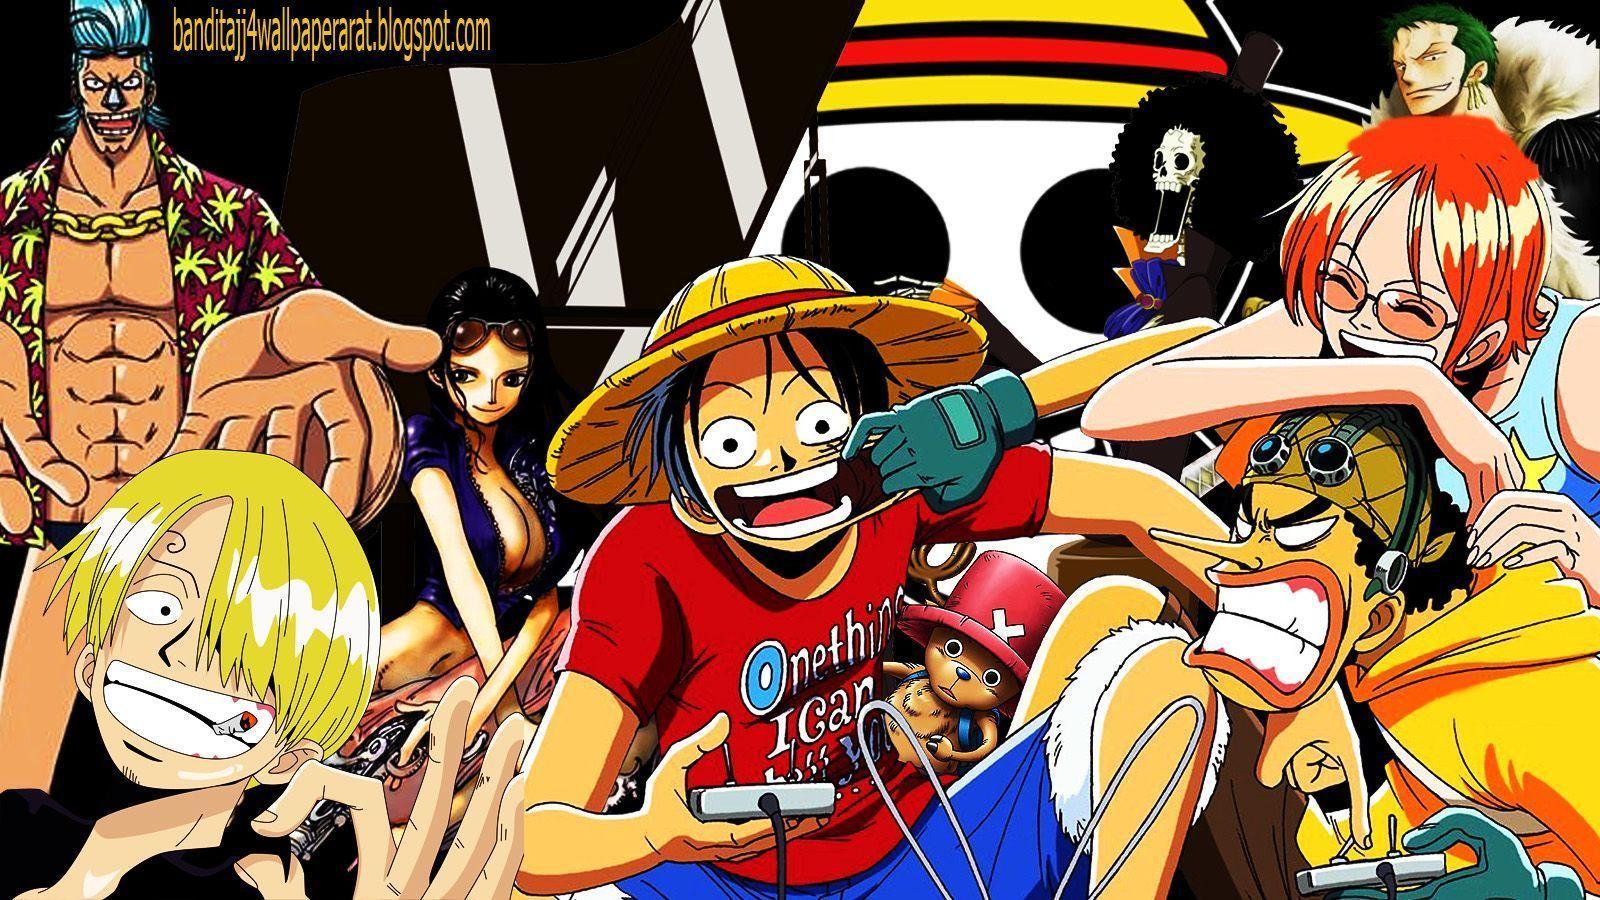 Wallpaper For > One Piece New World Crew Wallpaper